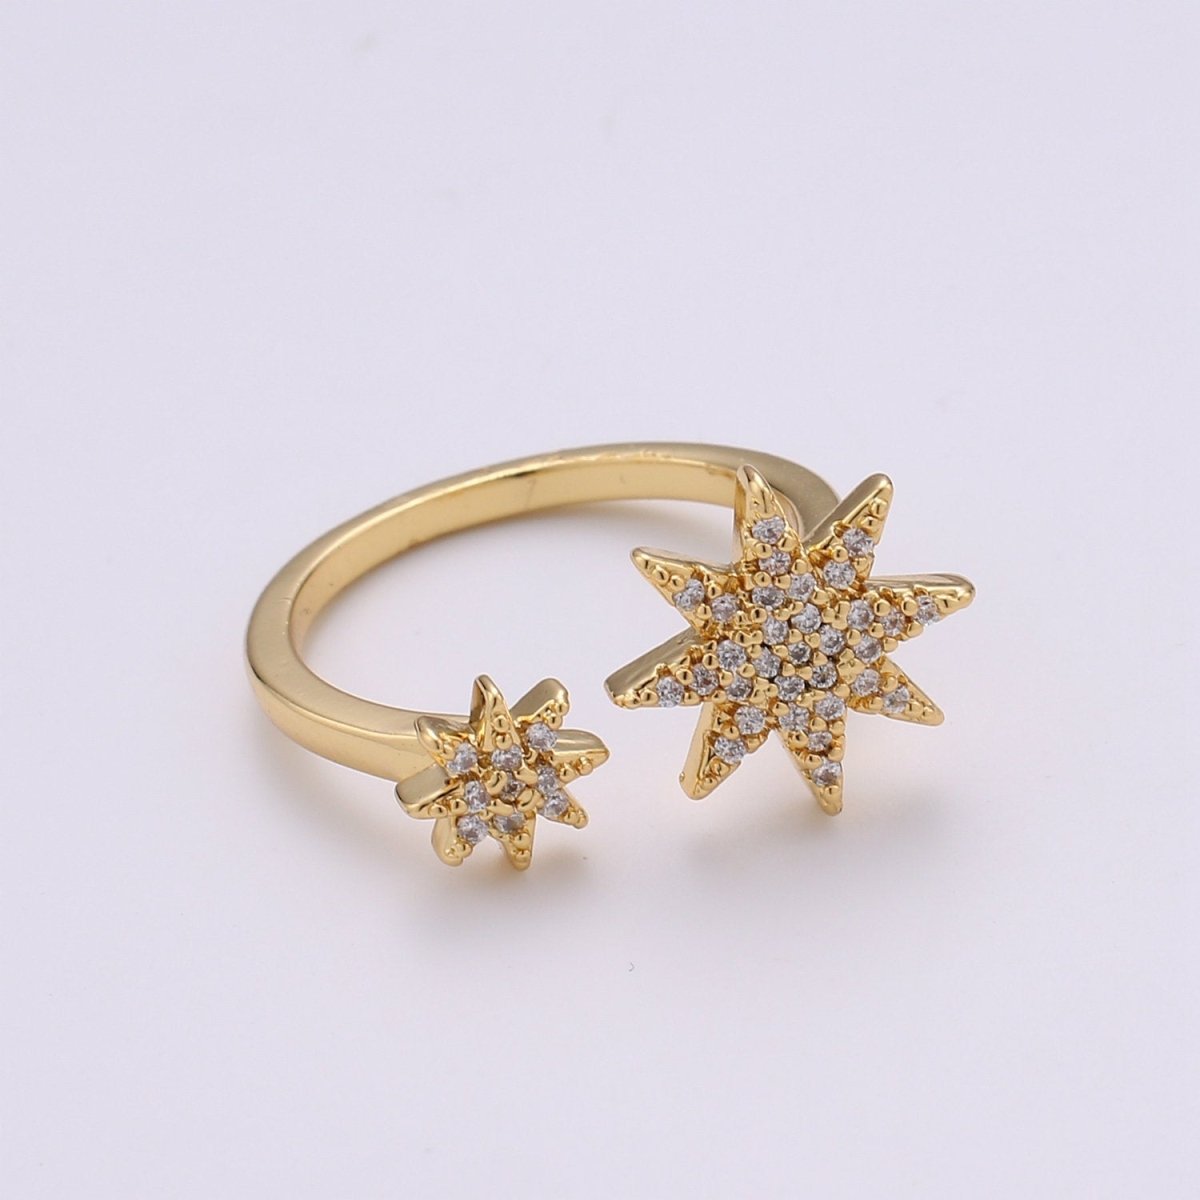 Gold North Star Ring, Dainty Star Ring, Adjustable Ring, Minimalist Star Ring, Minimalist Ring, Stackable Open Ring, Celestial Jewelry, R-100 - DLUXCA